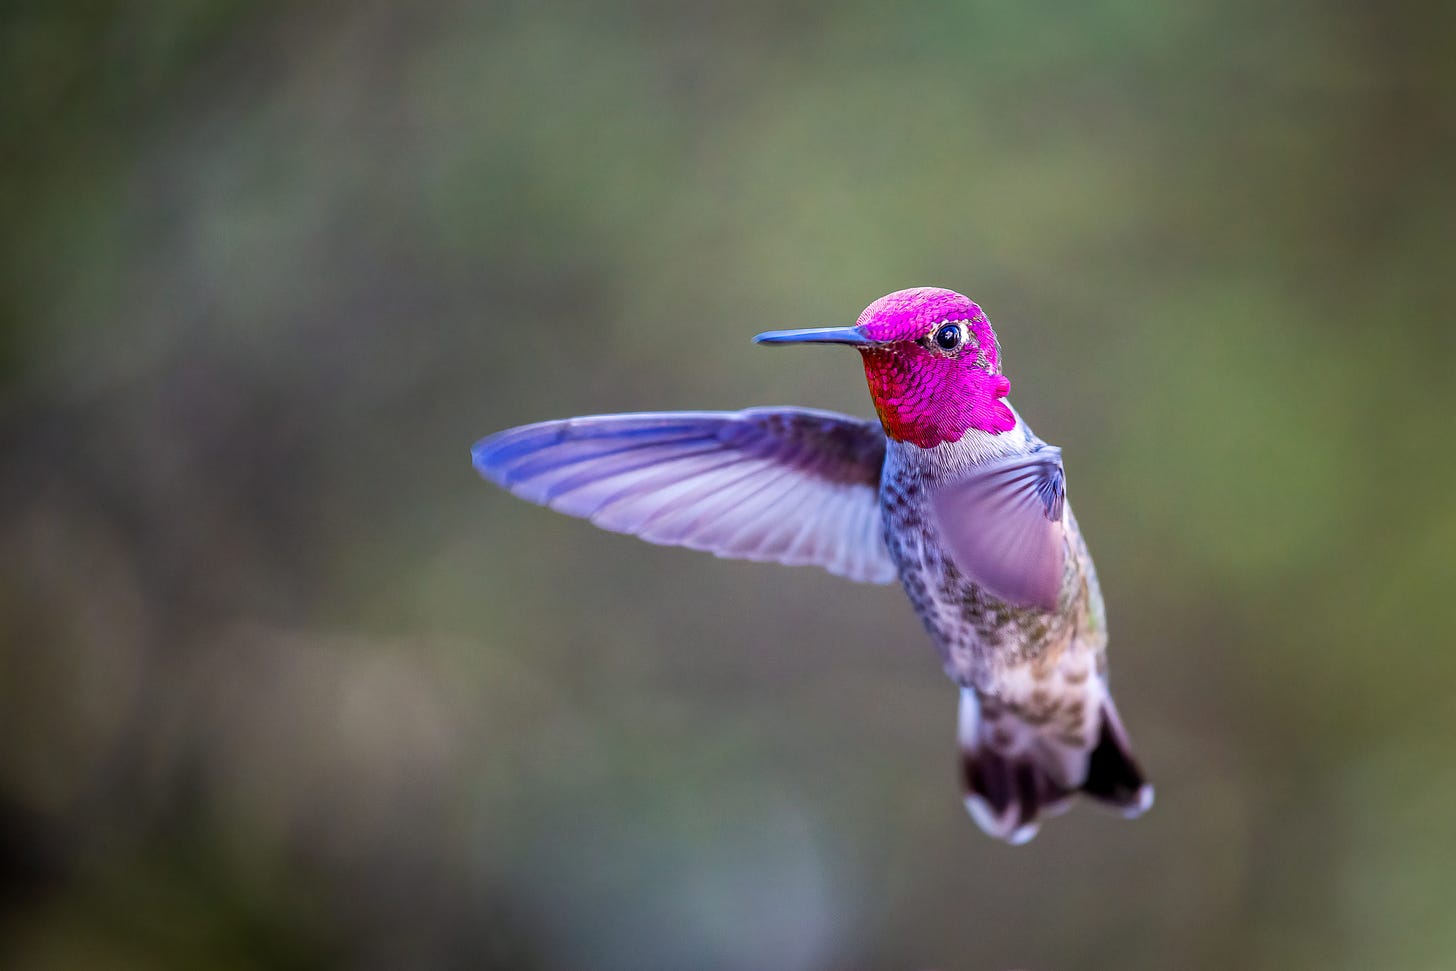 An Anna's Hummingbird mid-flight, with pink-purple head feathers and wings flapping